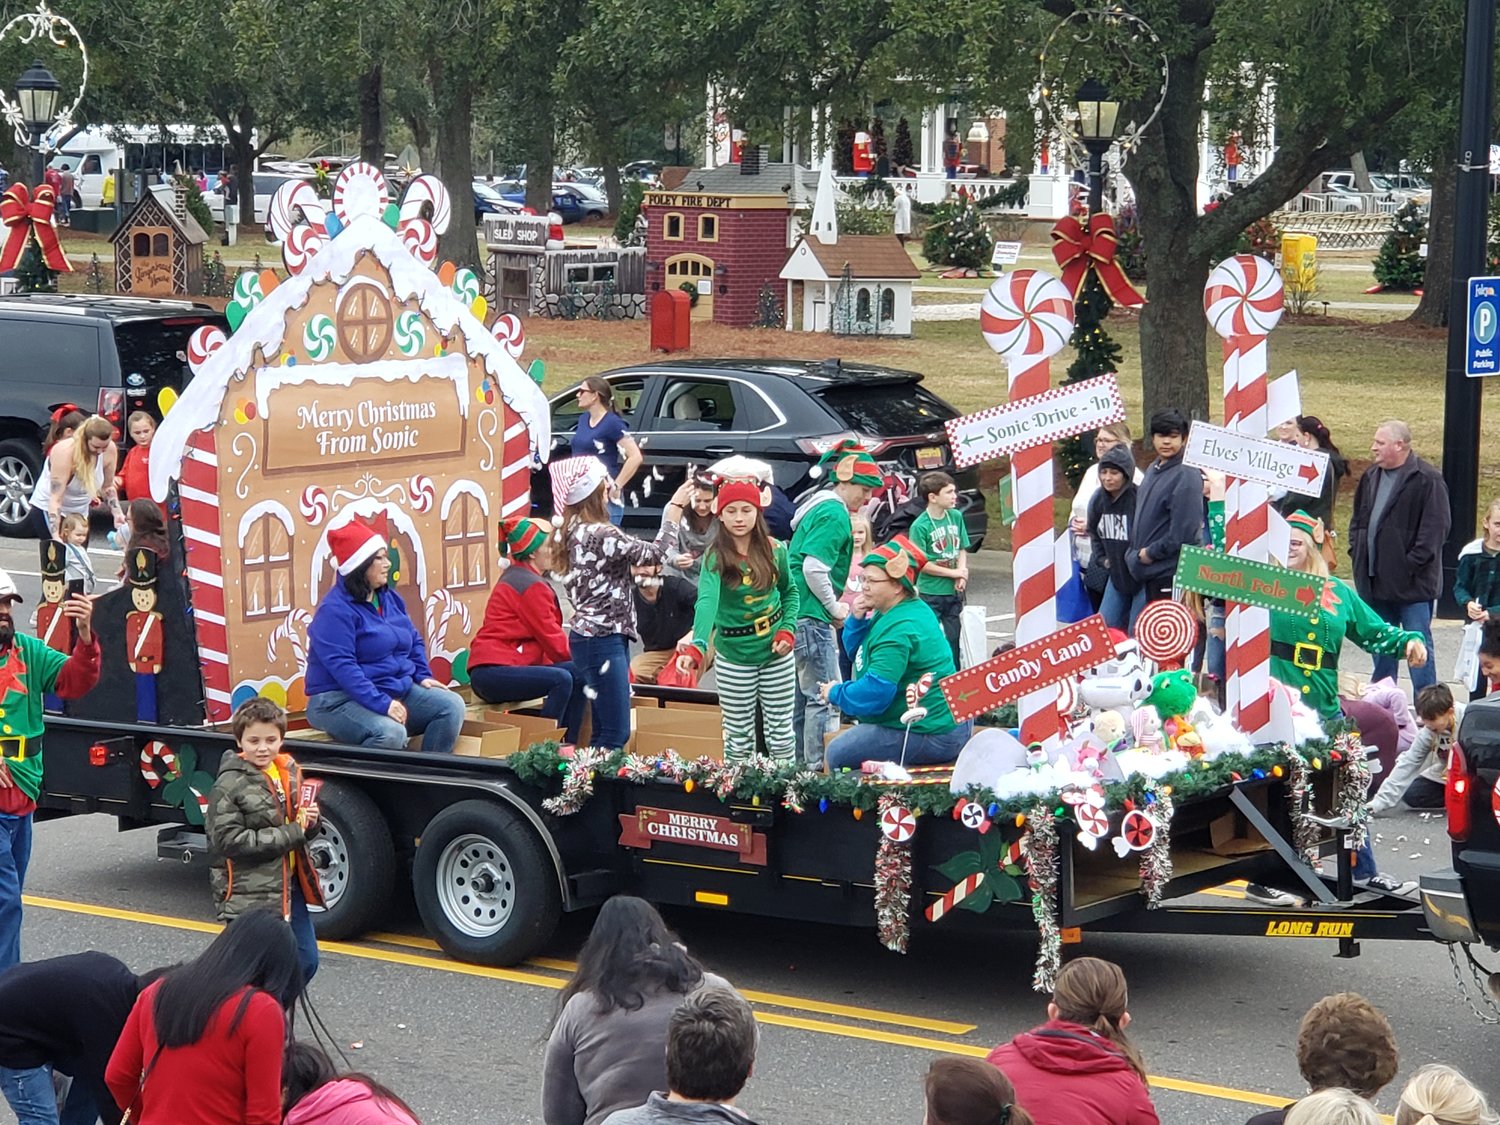 From the 2019 Foley Christmas Parade. The event was forced to cancel in 2020 due to the threat of COVID-19. Organizers hope to make this year’s event bigger and better than ever.